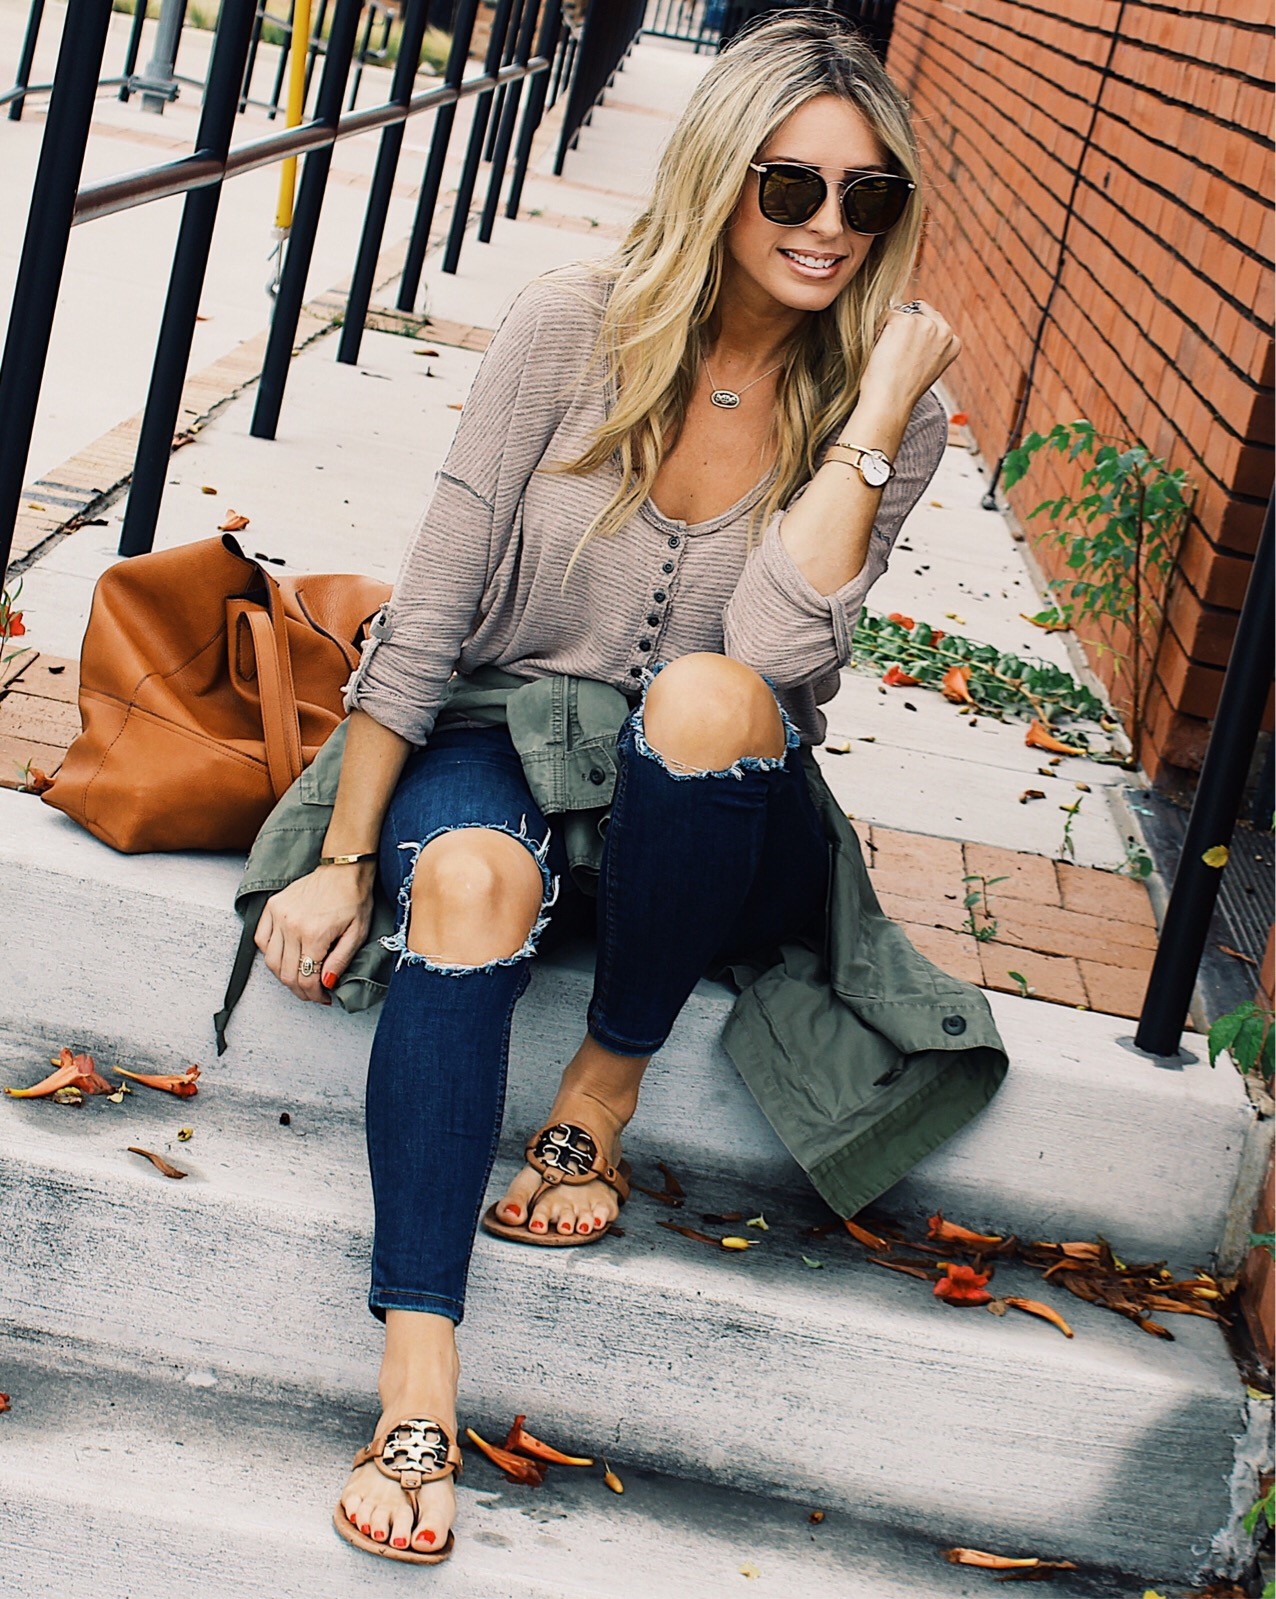 The Sue Style File: 15 Ways to Style Denim Jeans